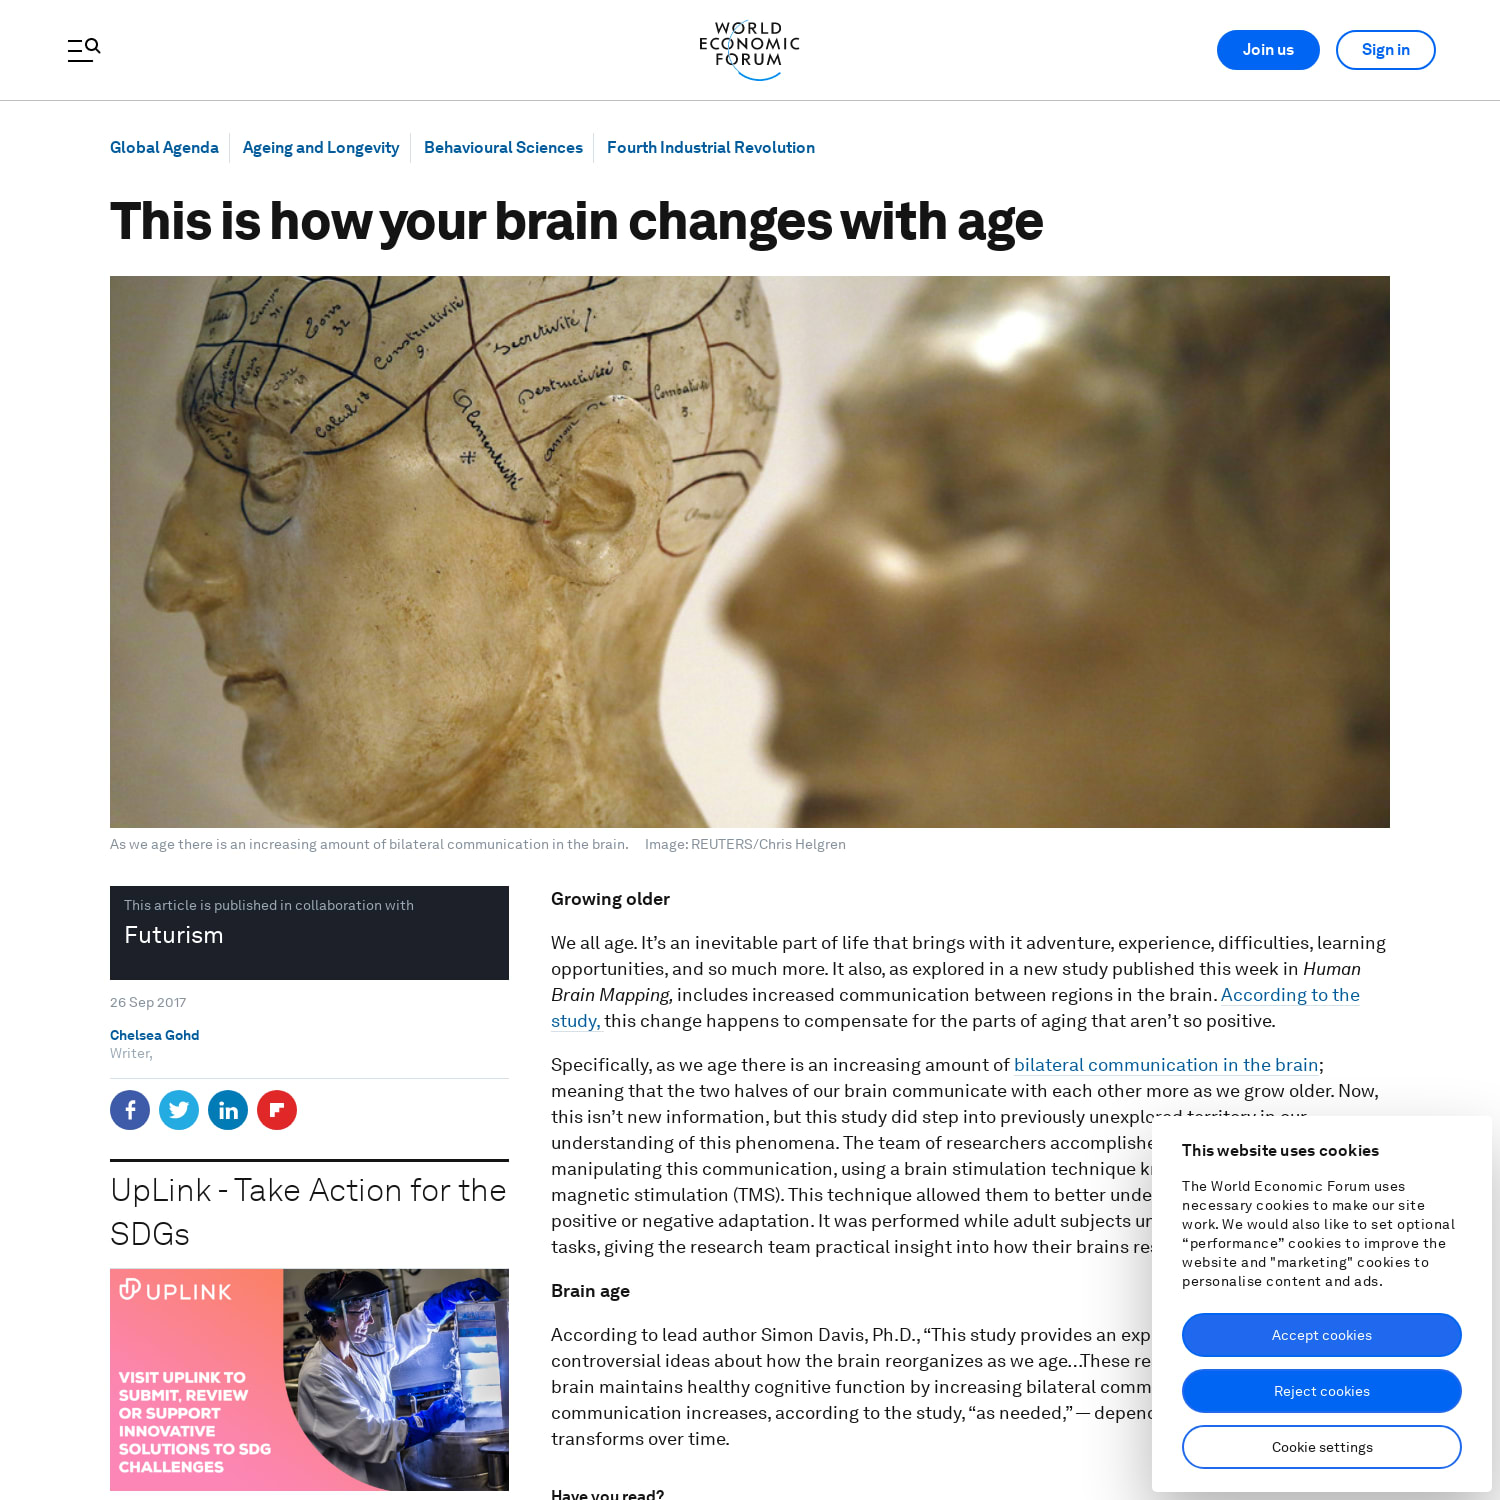 This is how your brain changes with age